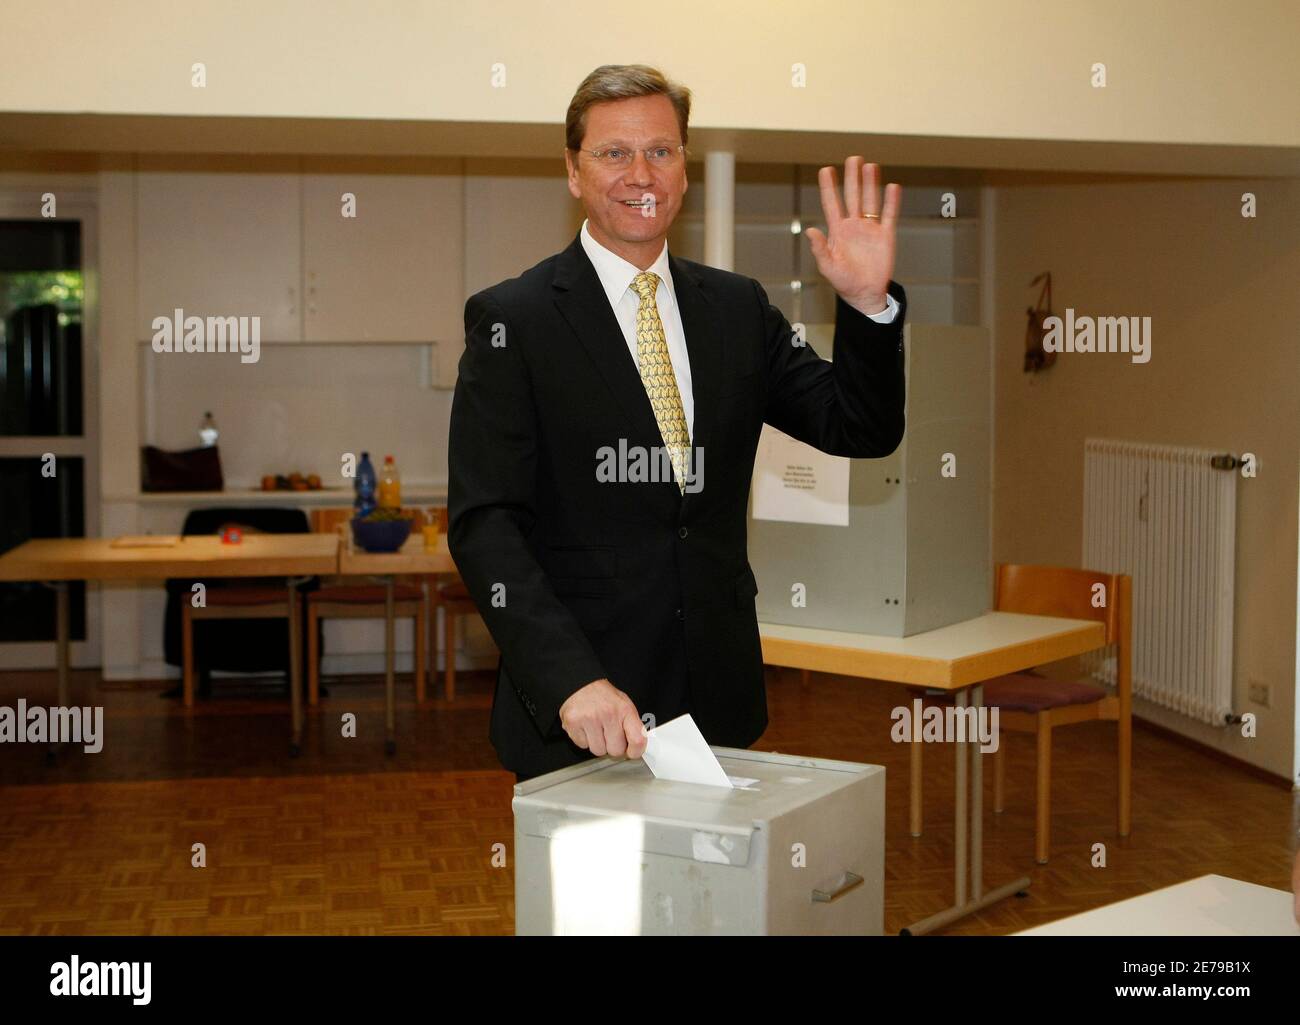 Guido Westerwelle, leader of the pro-business Free Democratic Party (FDP) casts his ballot in the general election at a polling station in Bonn September 27, 2009. Germans voted in the general election (Bundestagwahl) on Sunday.  REUTERS/Ina Fassbender (GERMANY POLITICS ELECTIONS IMAGES OF THE DAY) Stock Photo